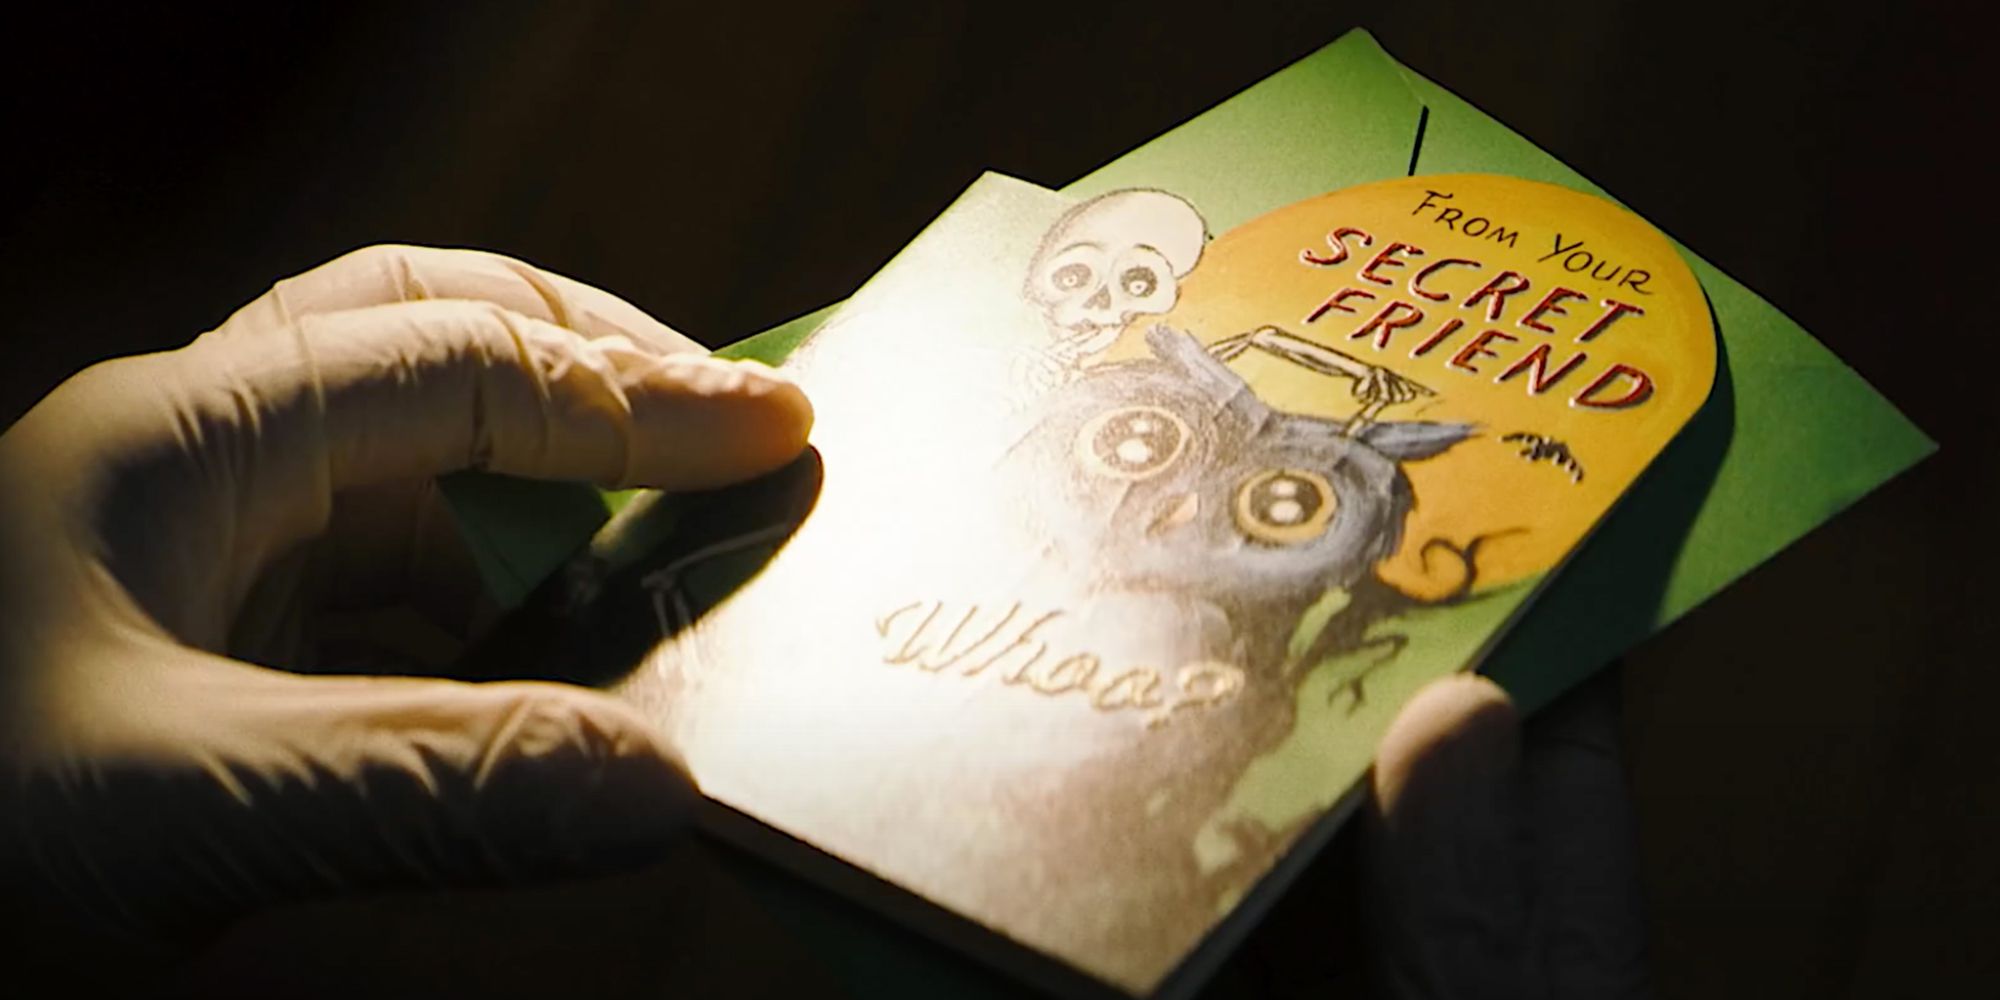 A still from The Batman trailer shows a card with an owl on it